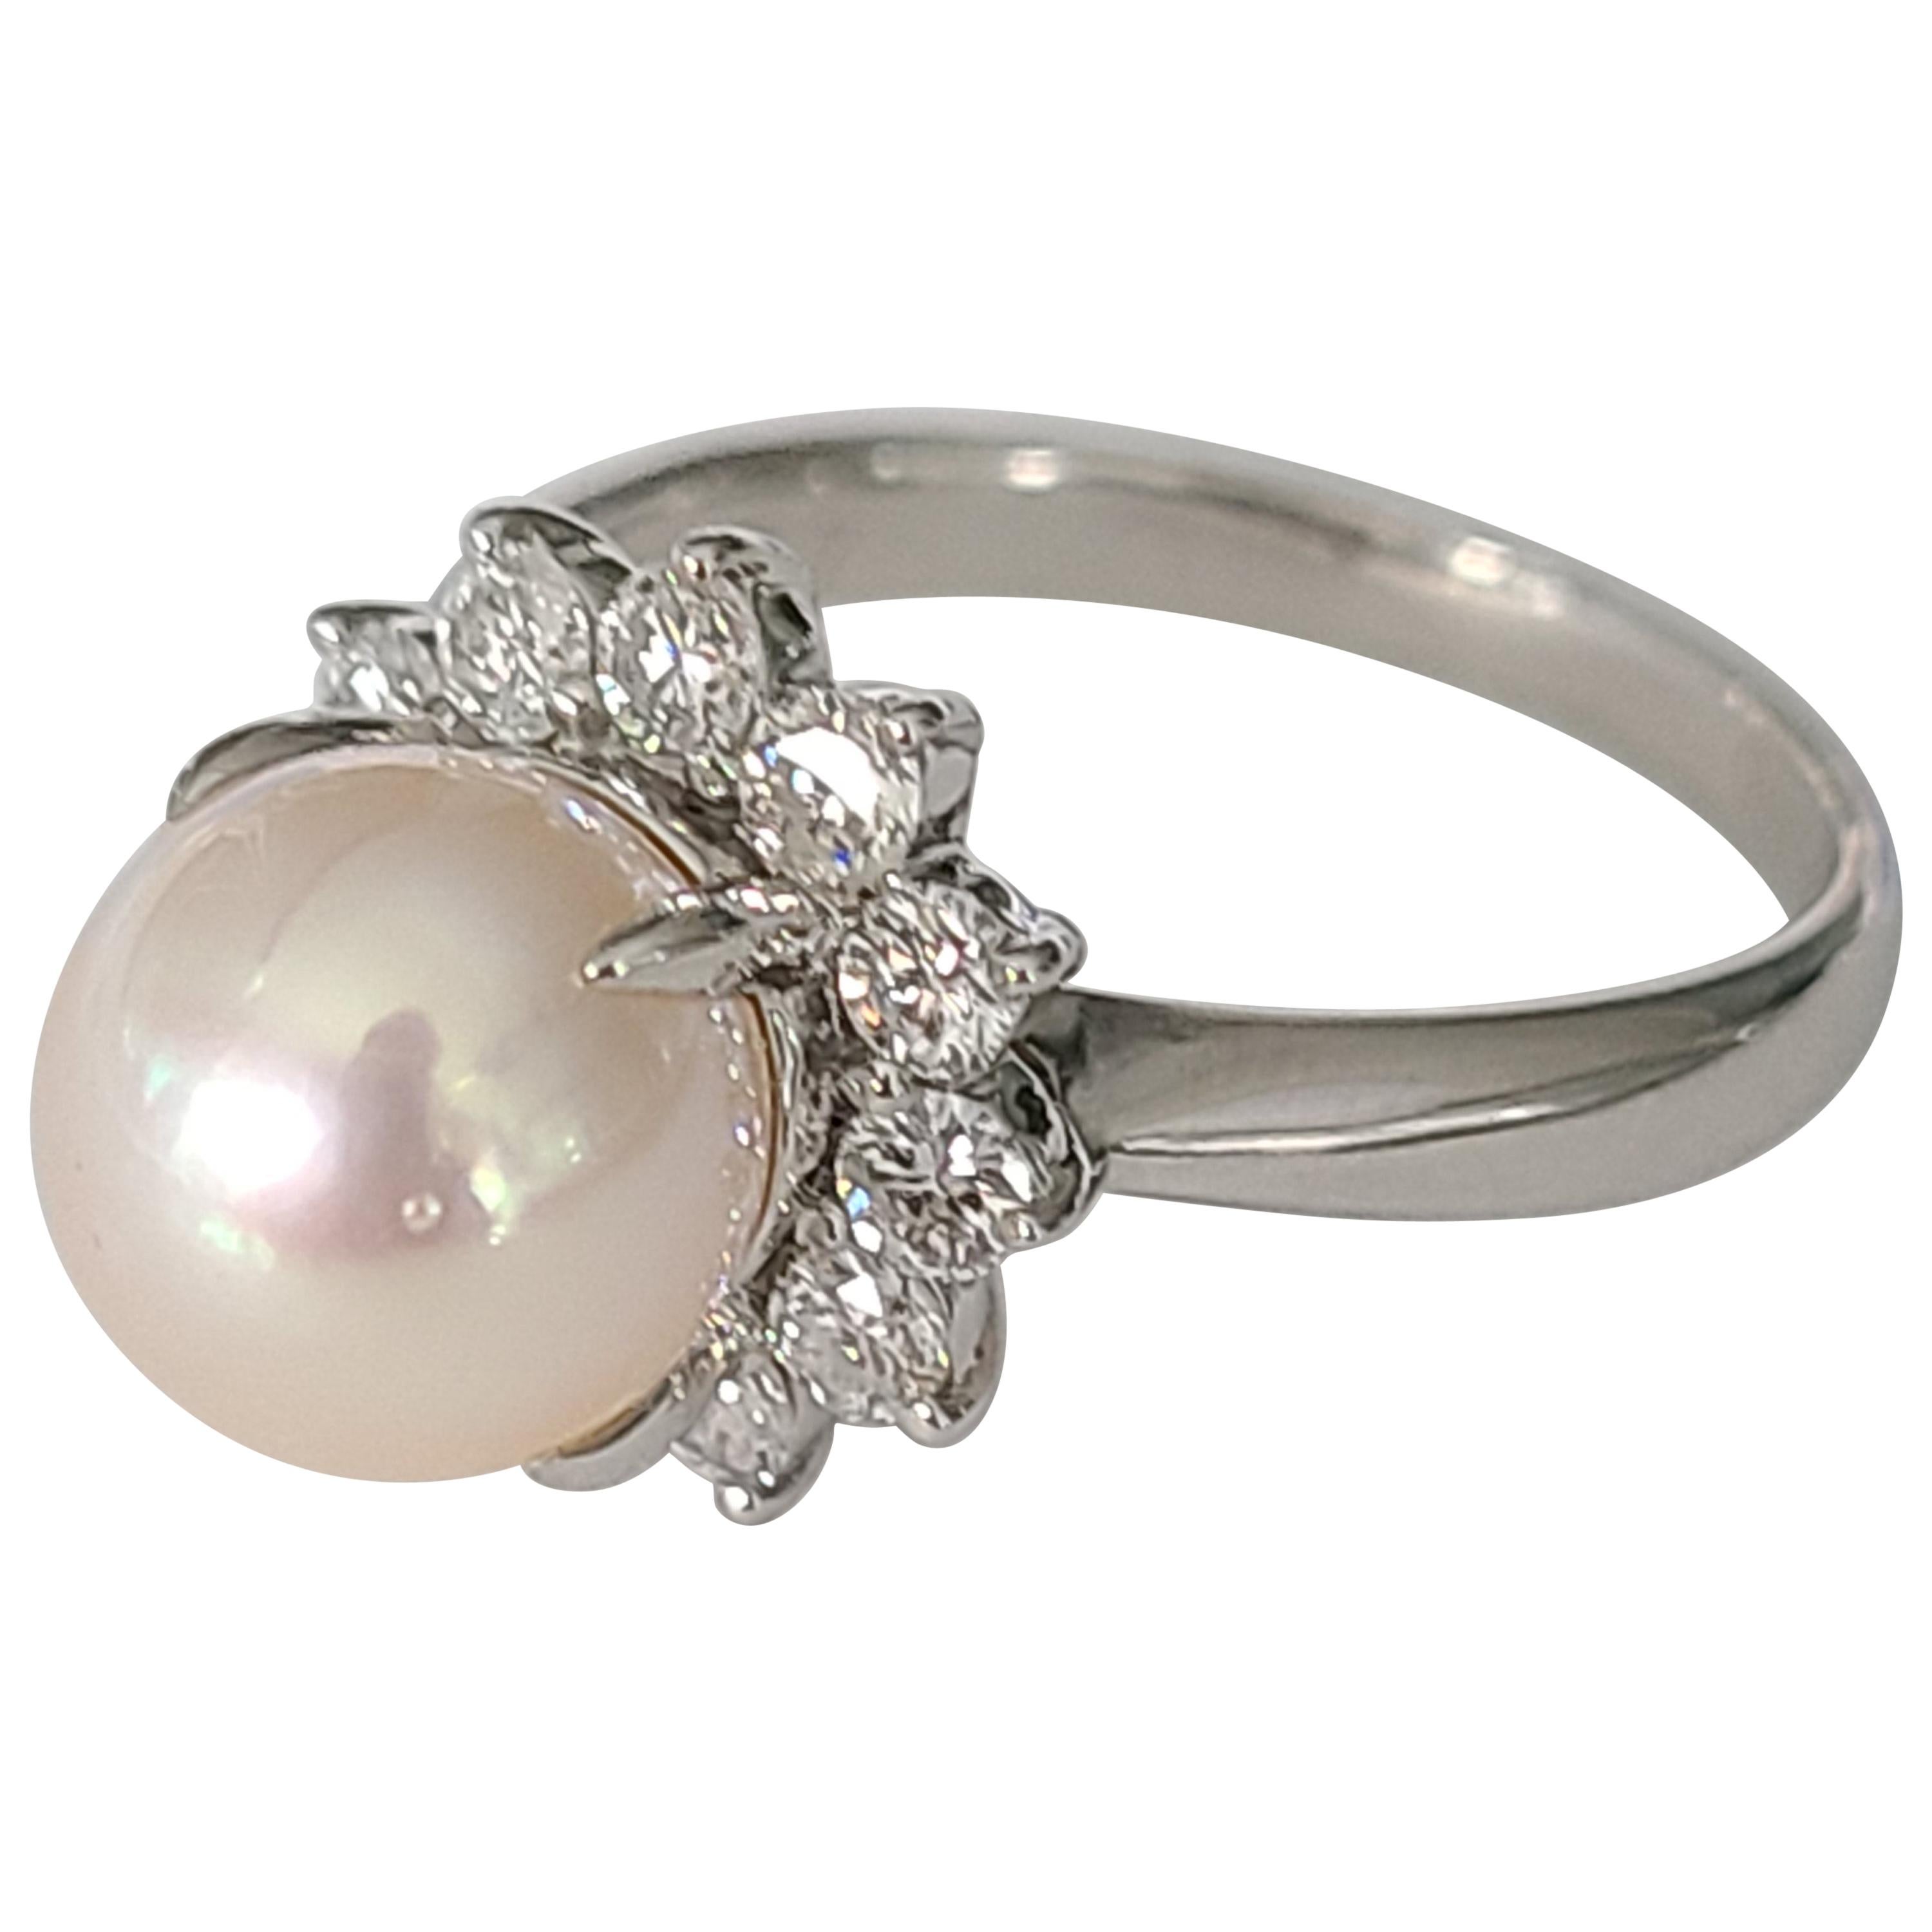 Pearl Ring Set in Platinum PT850 with Diamonds